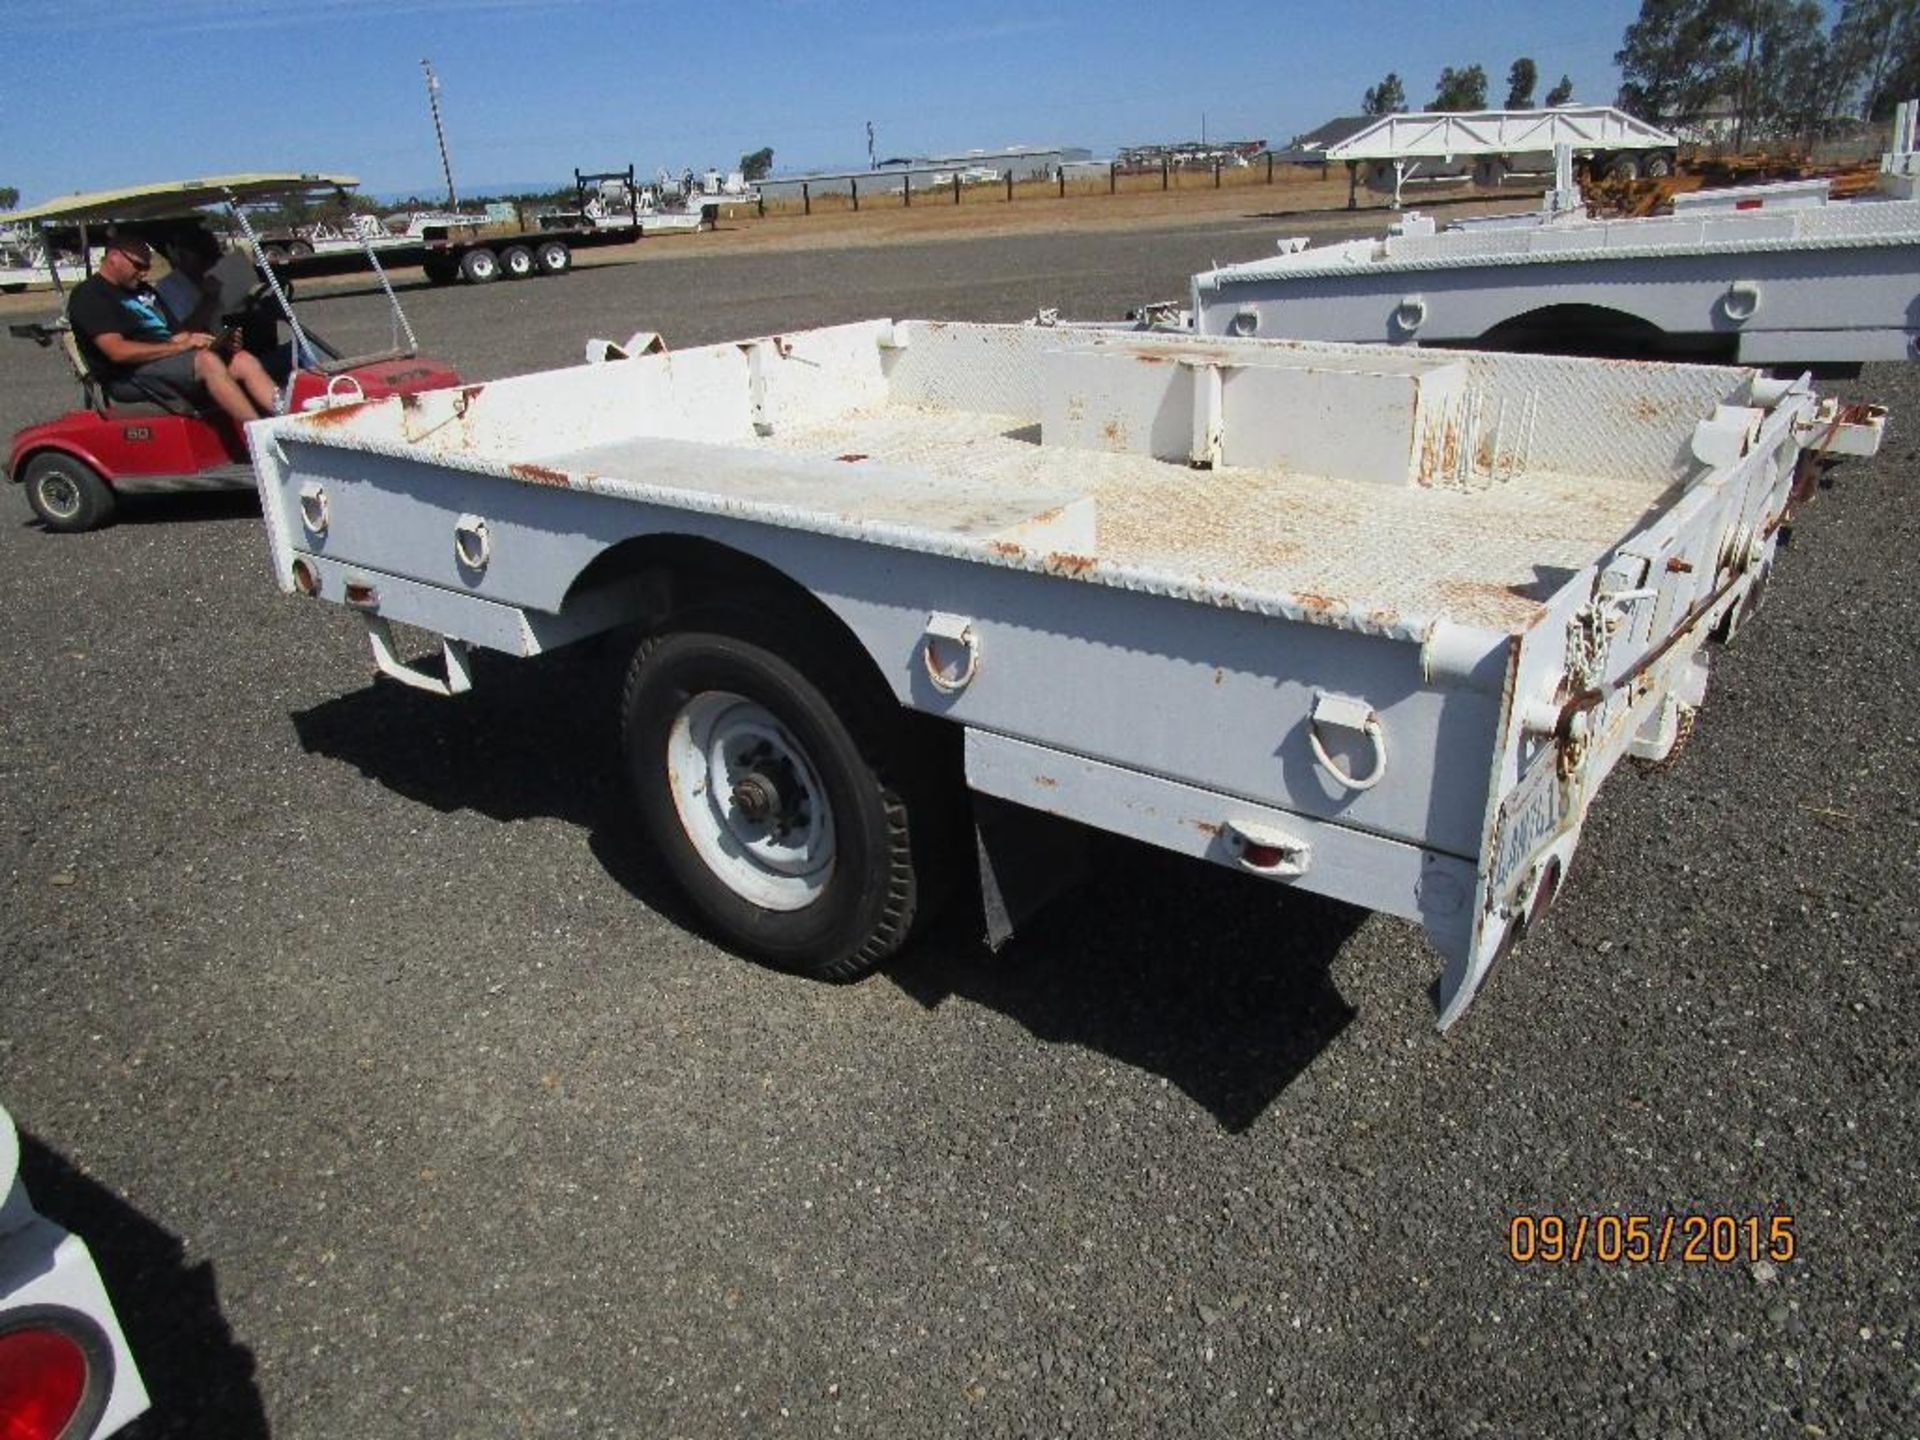 VIN 3139 LIC# 4AN7418 GVWR 9000Lbs Pintle Hitch Air Brakes Ratchet Cable Tie Downs Front and Back - Image 2 of 7